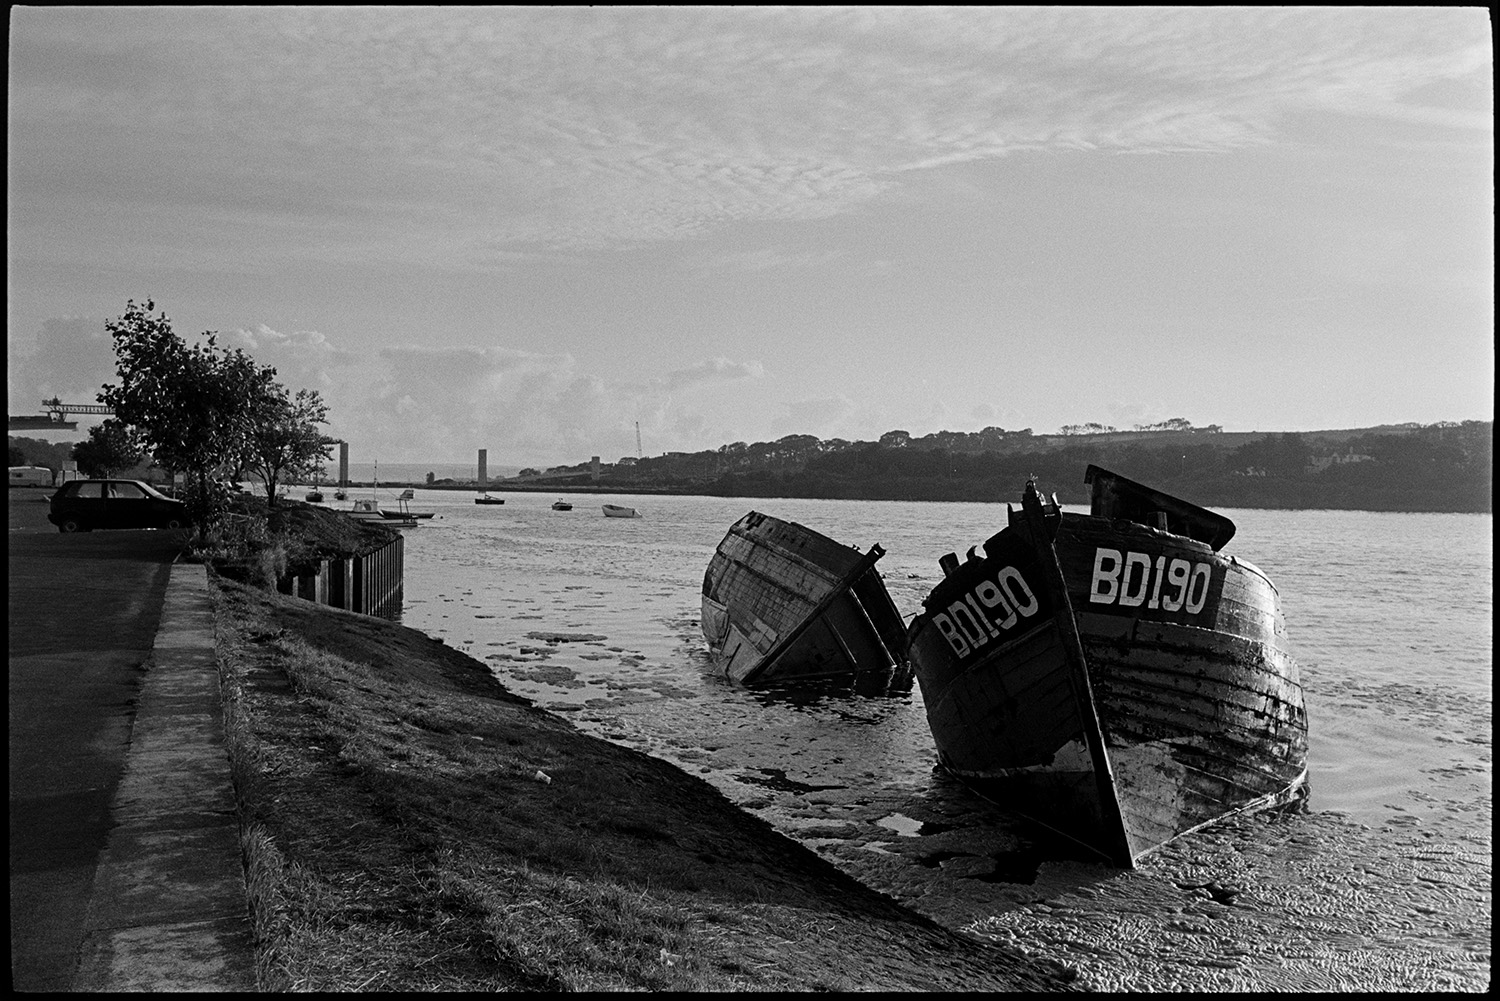 Abandoned fishing boats, bridge construction in background, early morning.
[Two abandoned wooden fishing boats near the river bank at Bideford on the River Torridge. Boats on the river and the pillars for Bideford New Bridge are under construction in the background. The boat in the foreground has the number 'BD190' painted on it.]